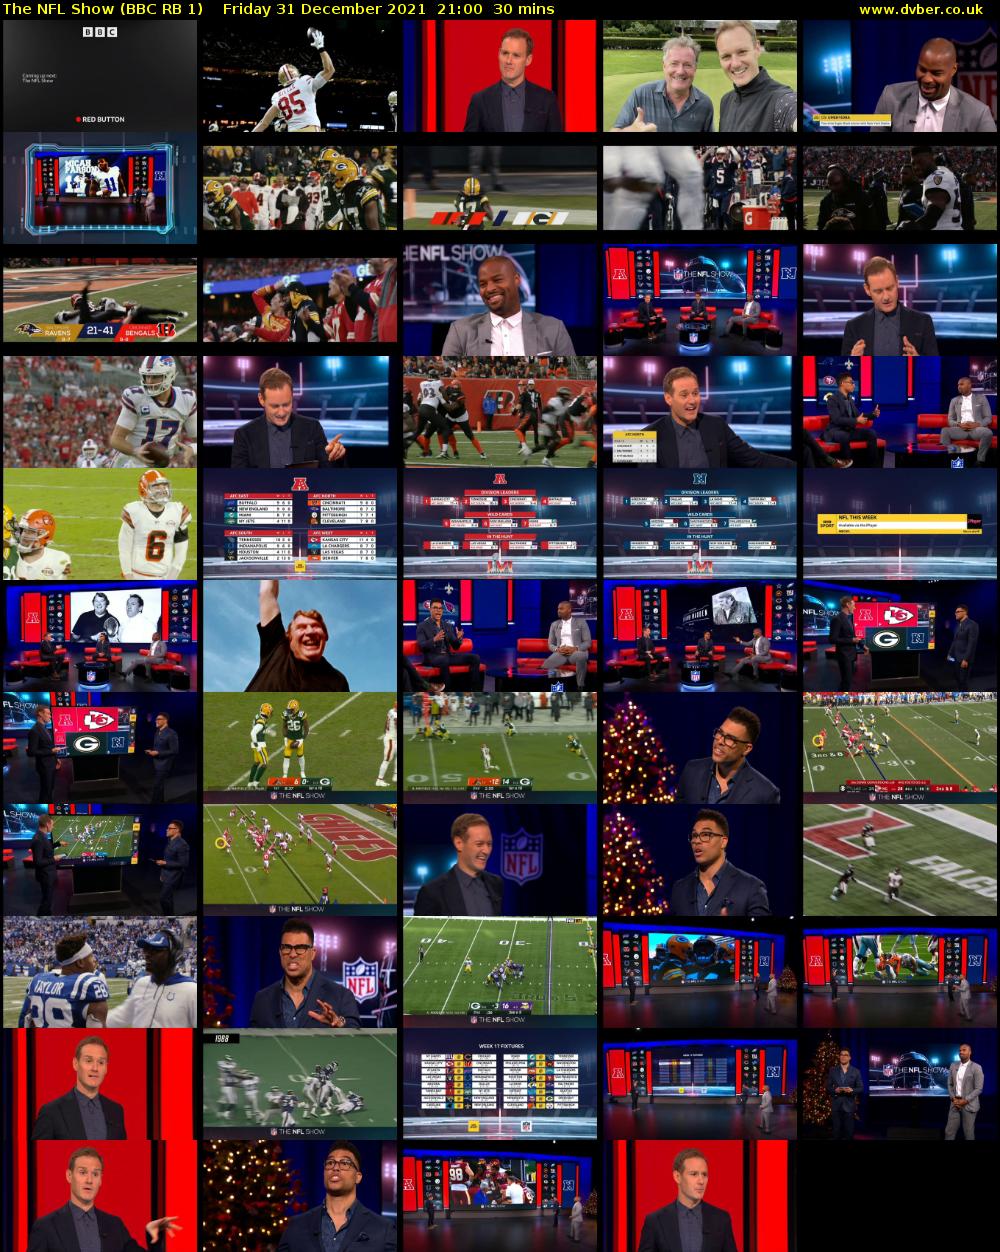 The NFL Show (BBC RB 1) Friday 31 December 2021 21:00 - 21:30